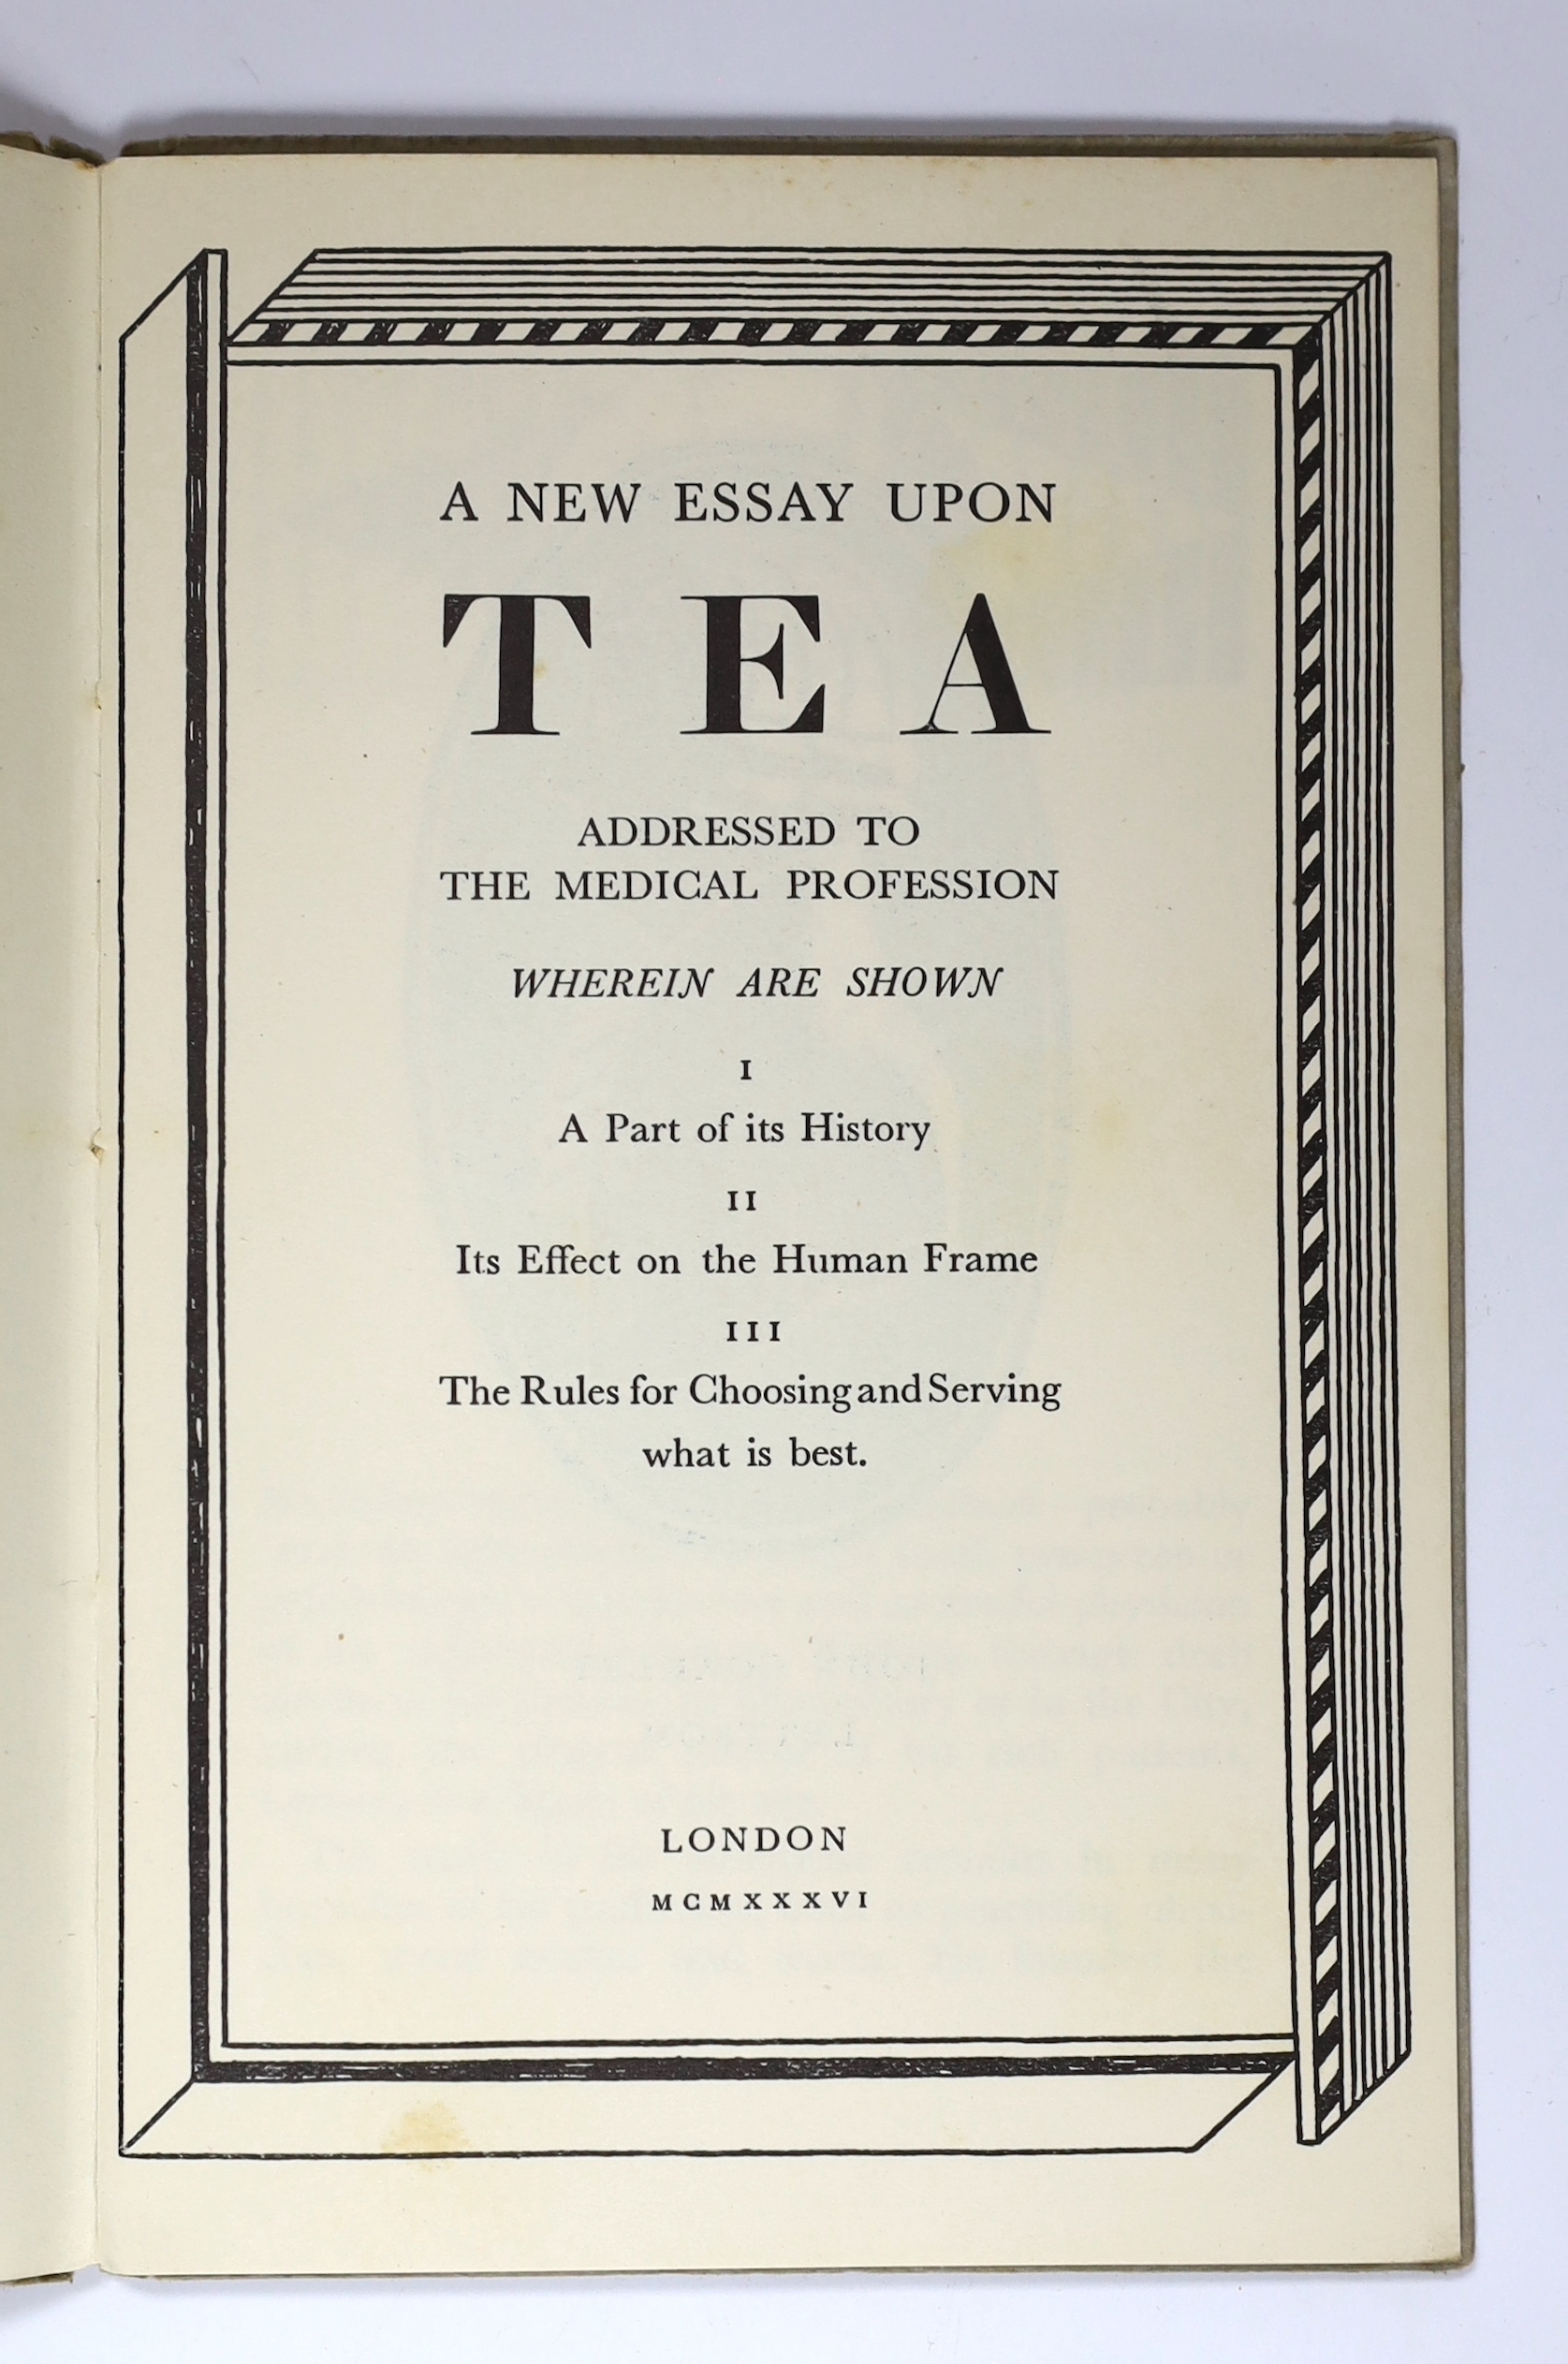 Bawden, Edward (illustrator) - A New Essay upon Tea, illustrated with 10 drawings (some full page) and borders by Edward Bawden, issued without a d/j, 8vo, grey paper boards, Empire Tra Marketing Board, London, 1936 and